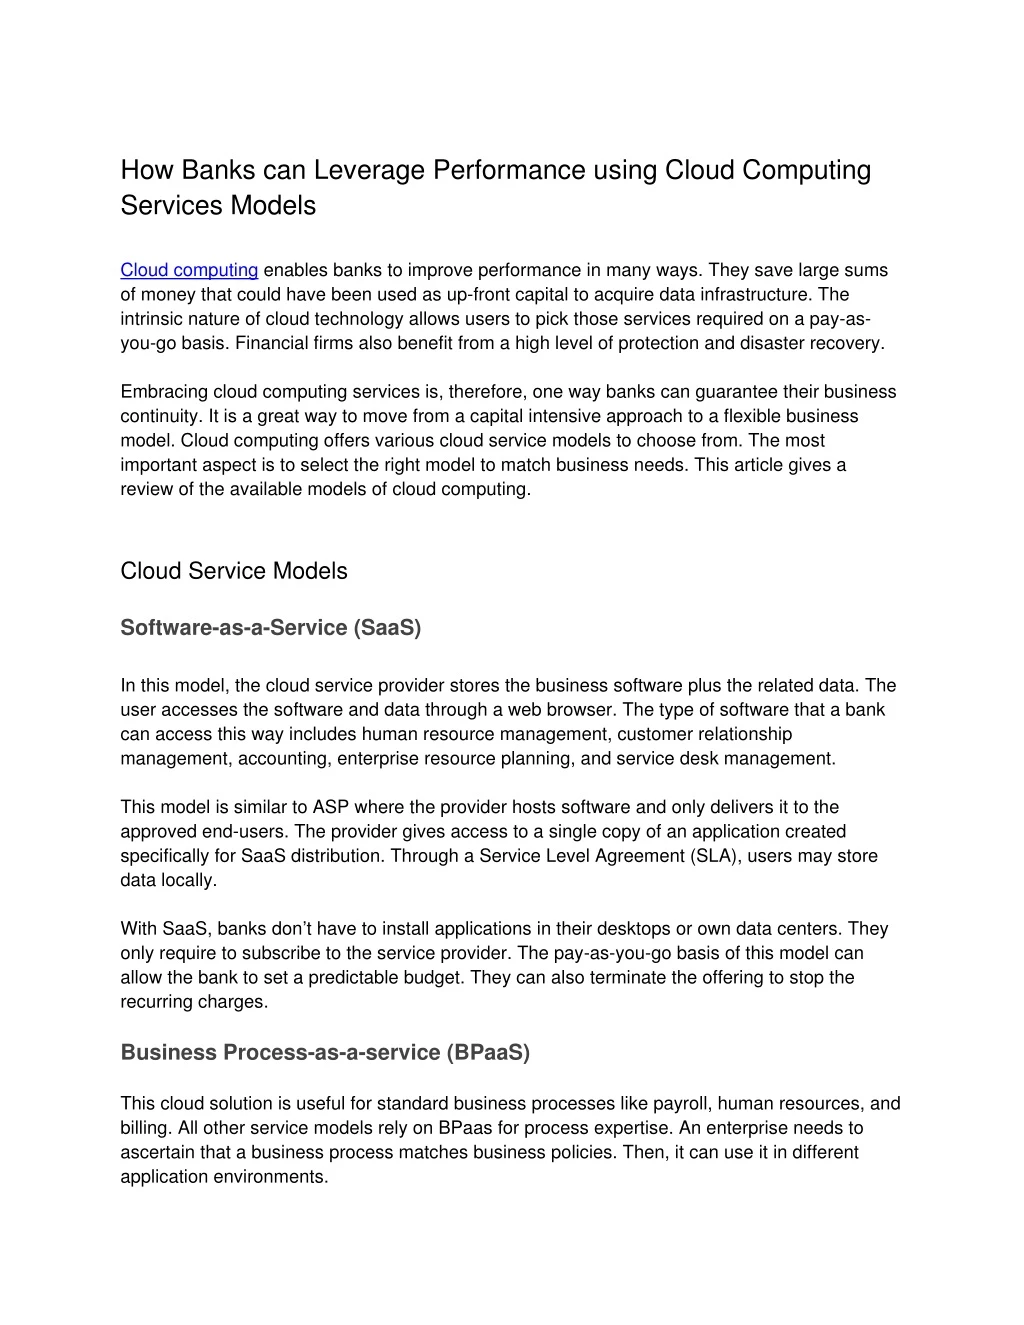 how banks can leverage performance using cloud